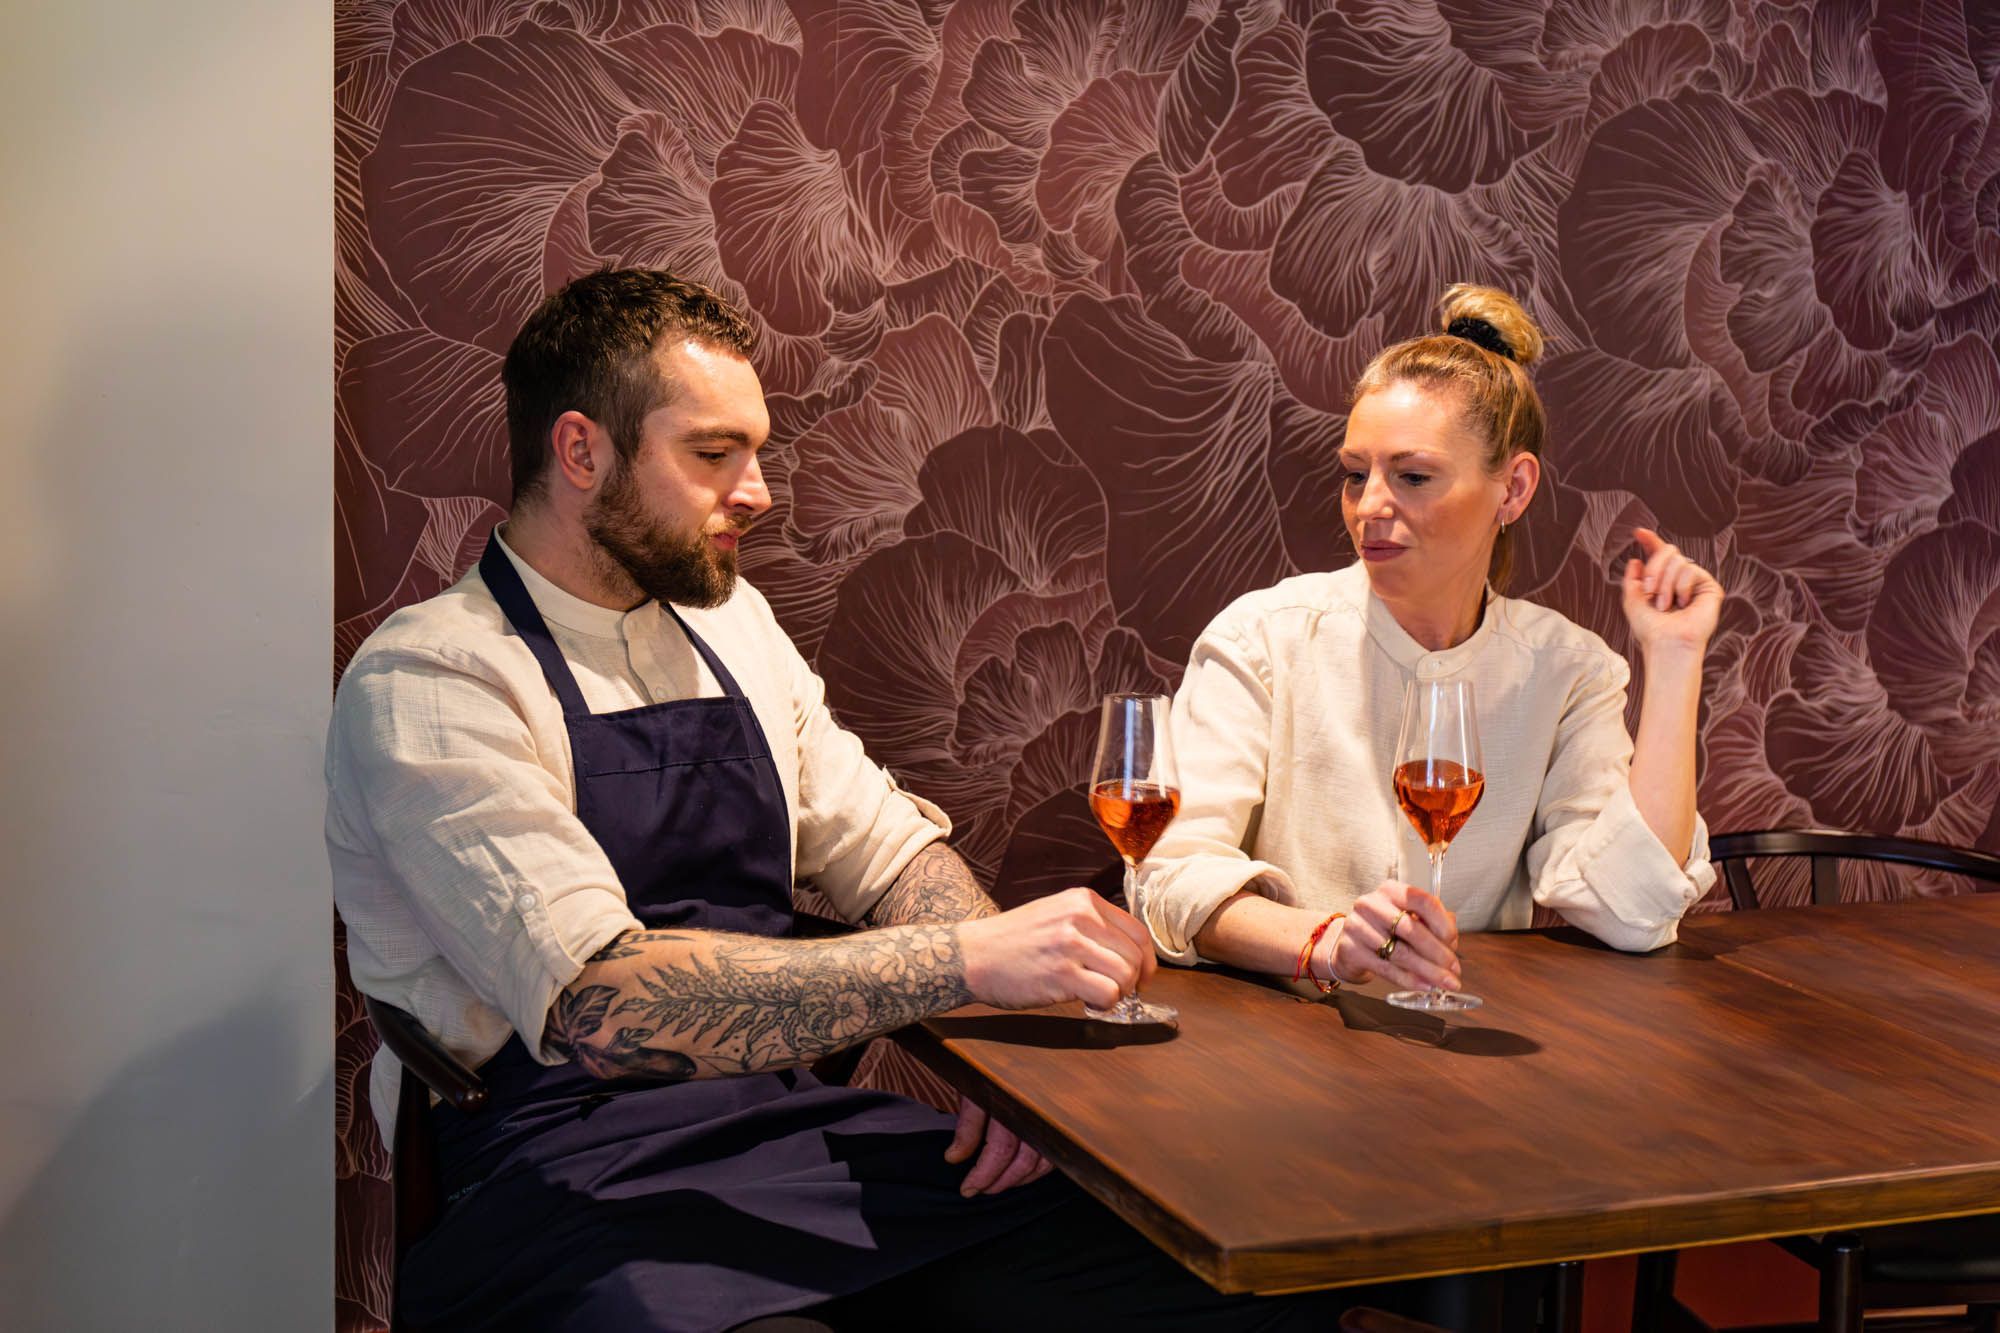 Chef Tom Stephens and Madeleine Riches